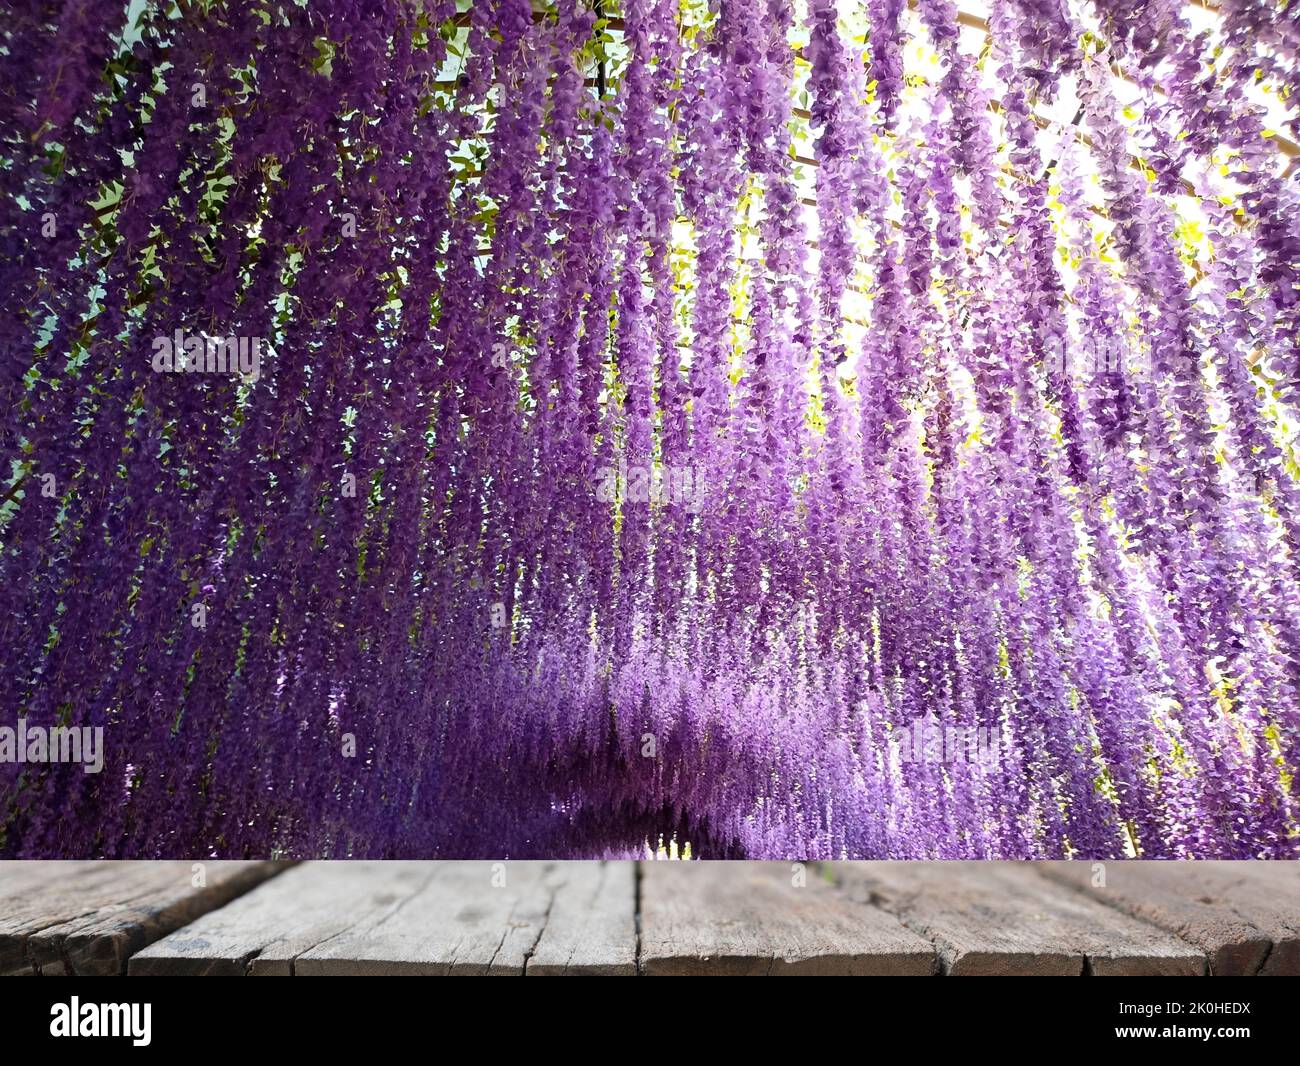 blurry hanging purple flower tunnel with wooden table for display product Stock Photo